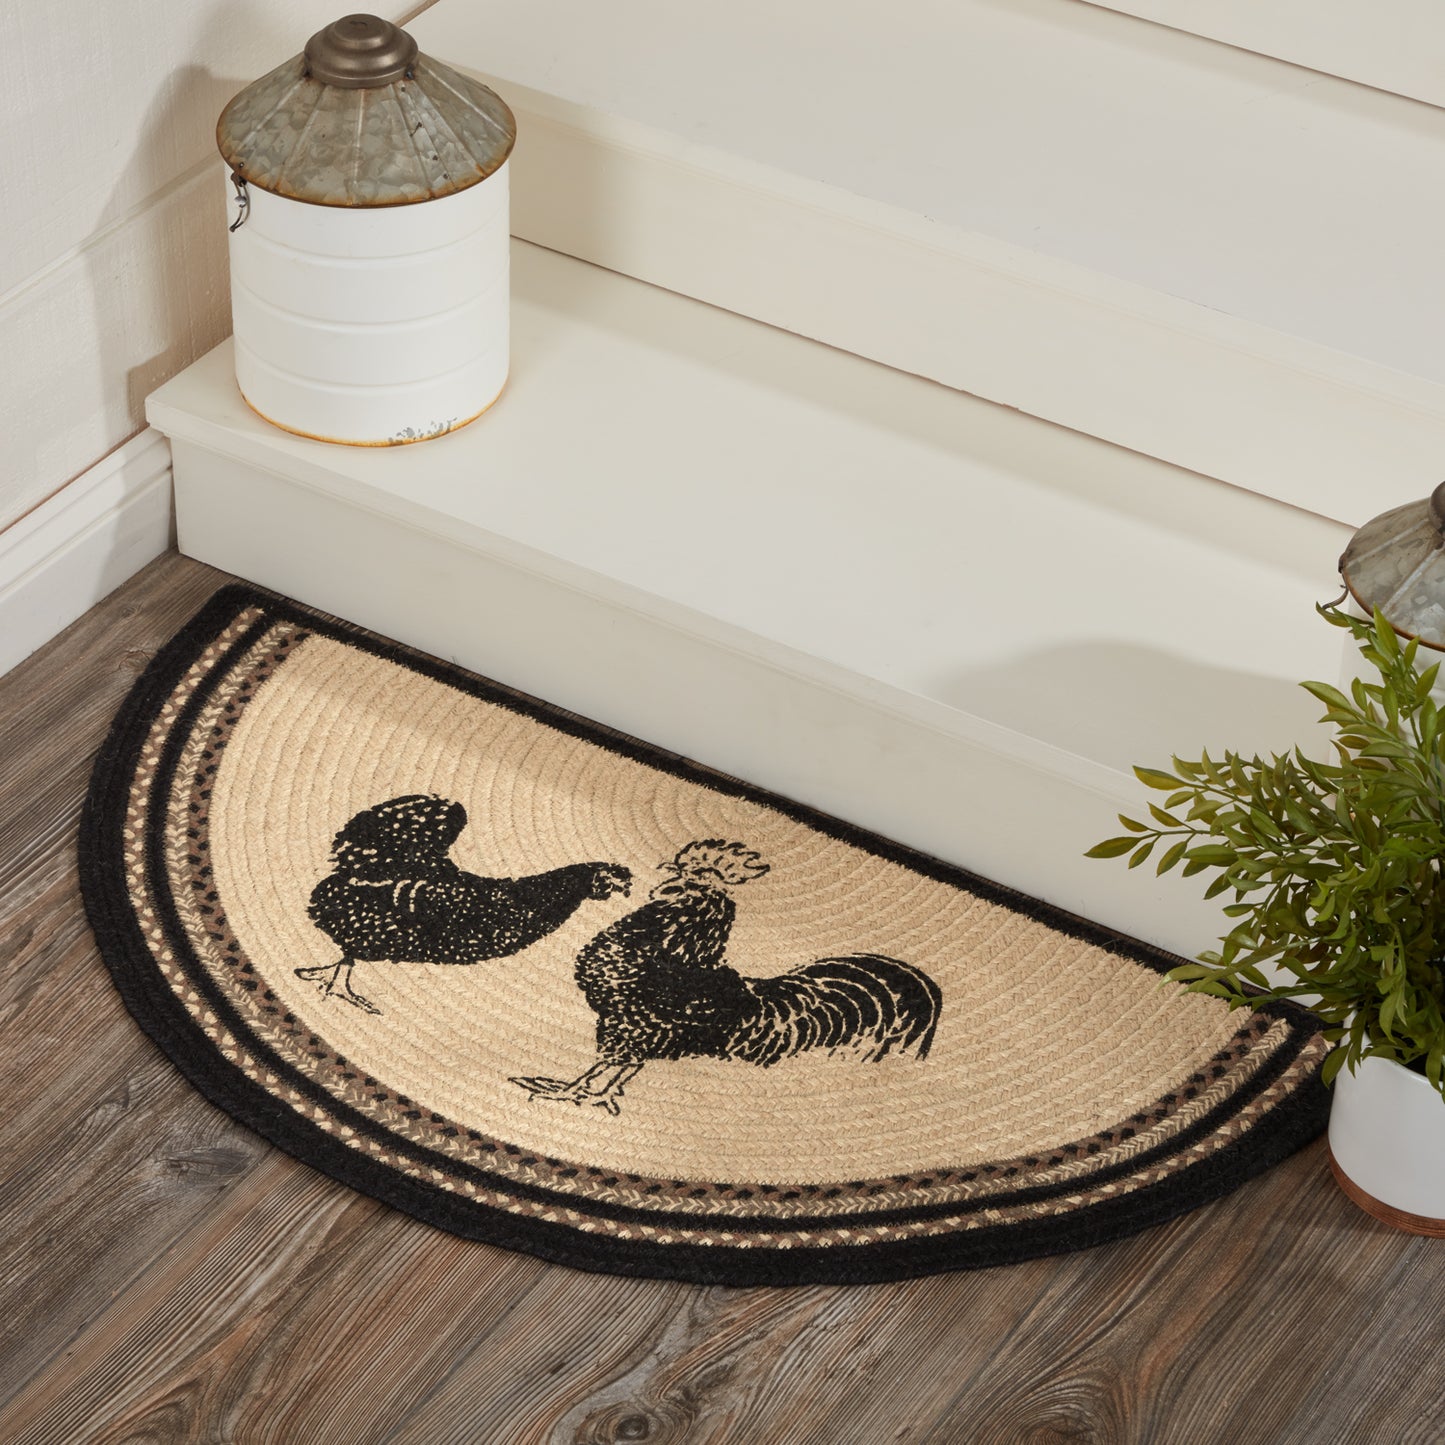 69392-Sawyer-Mill-Charcoal-Poultry-Jute-Rug-Half-Circle-w-Pad-16.5x33-image-1